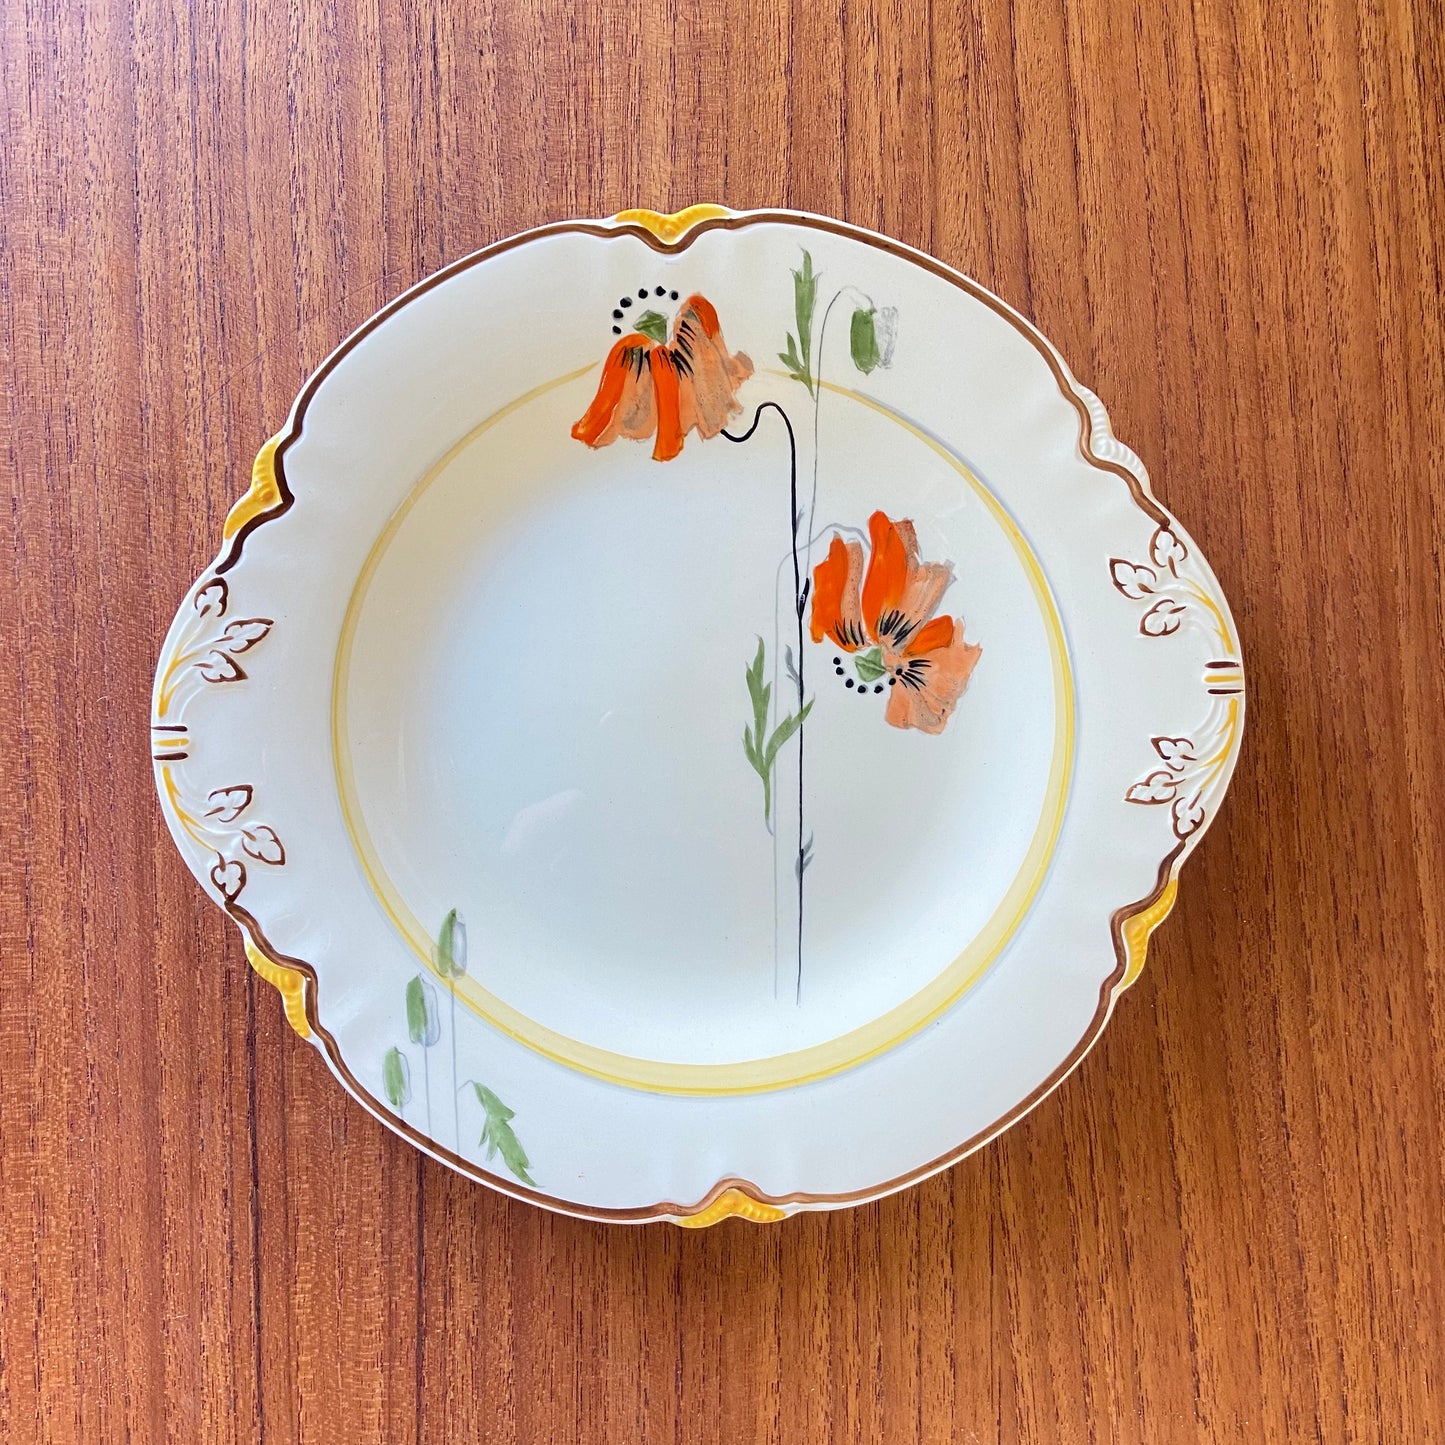 Woods Ivory Ware "Cremone" Side Plate